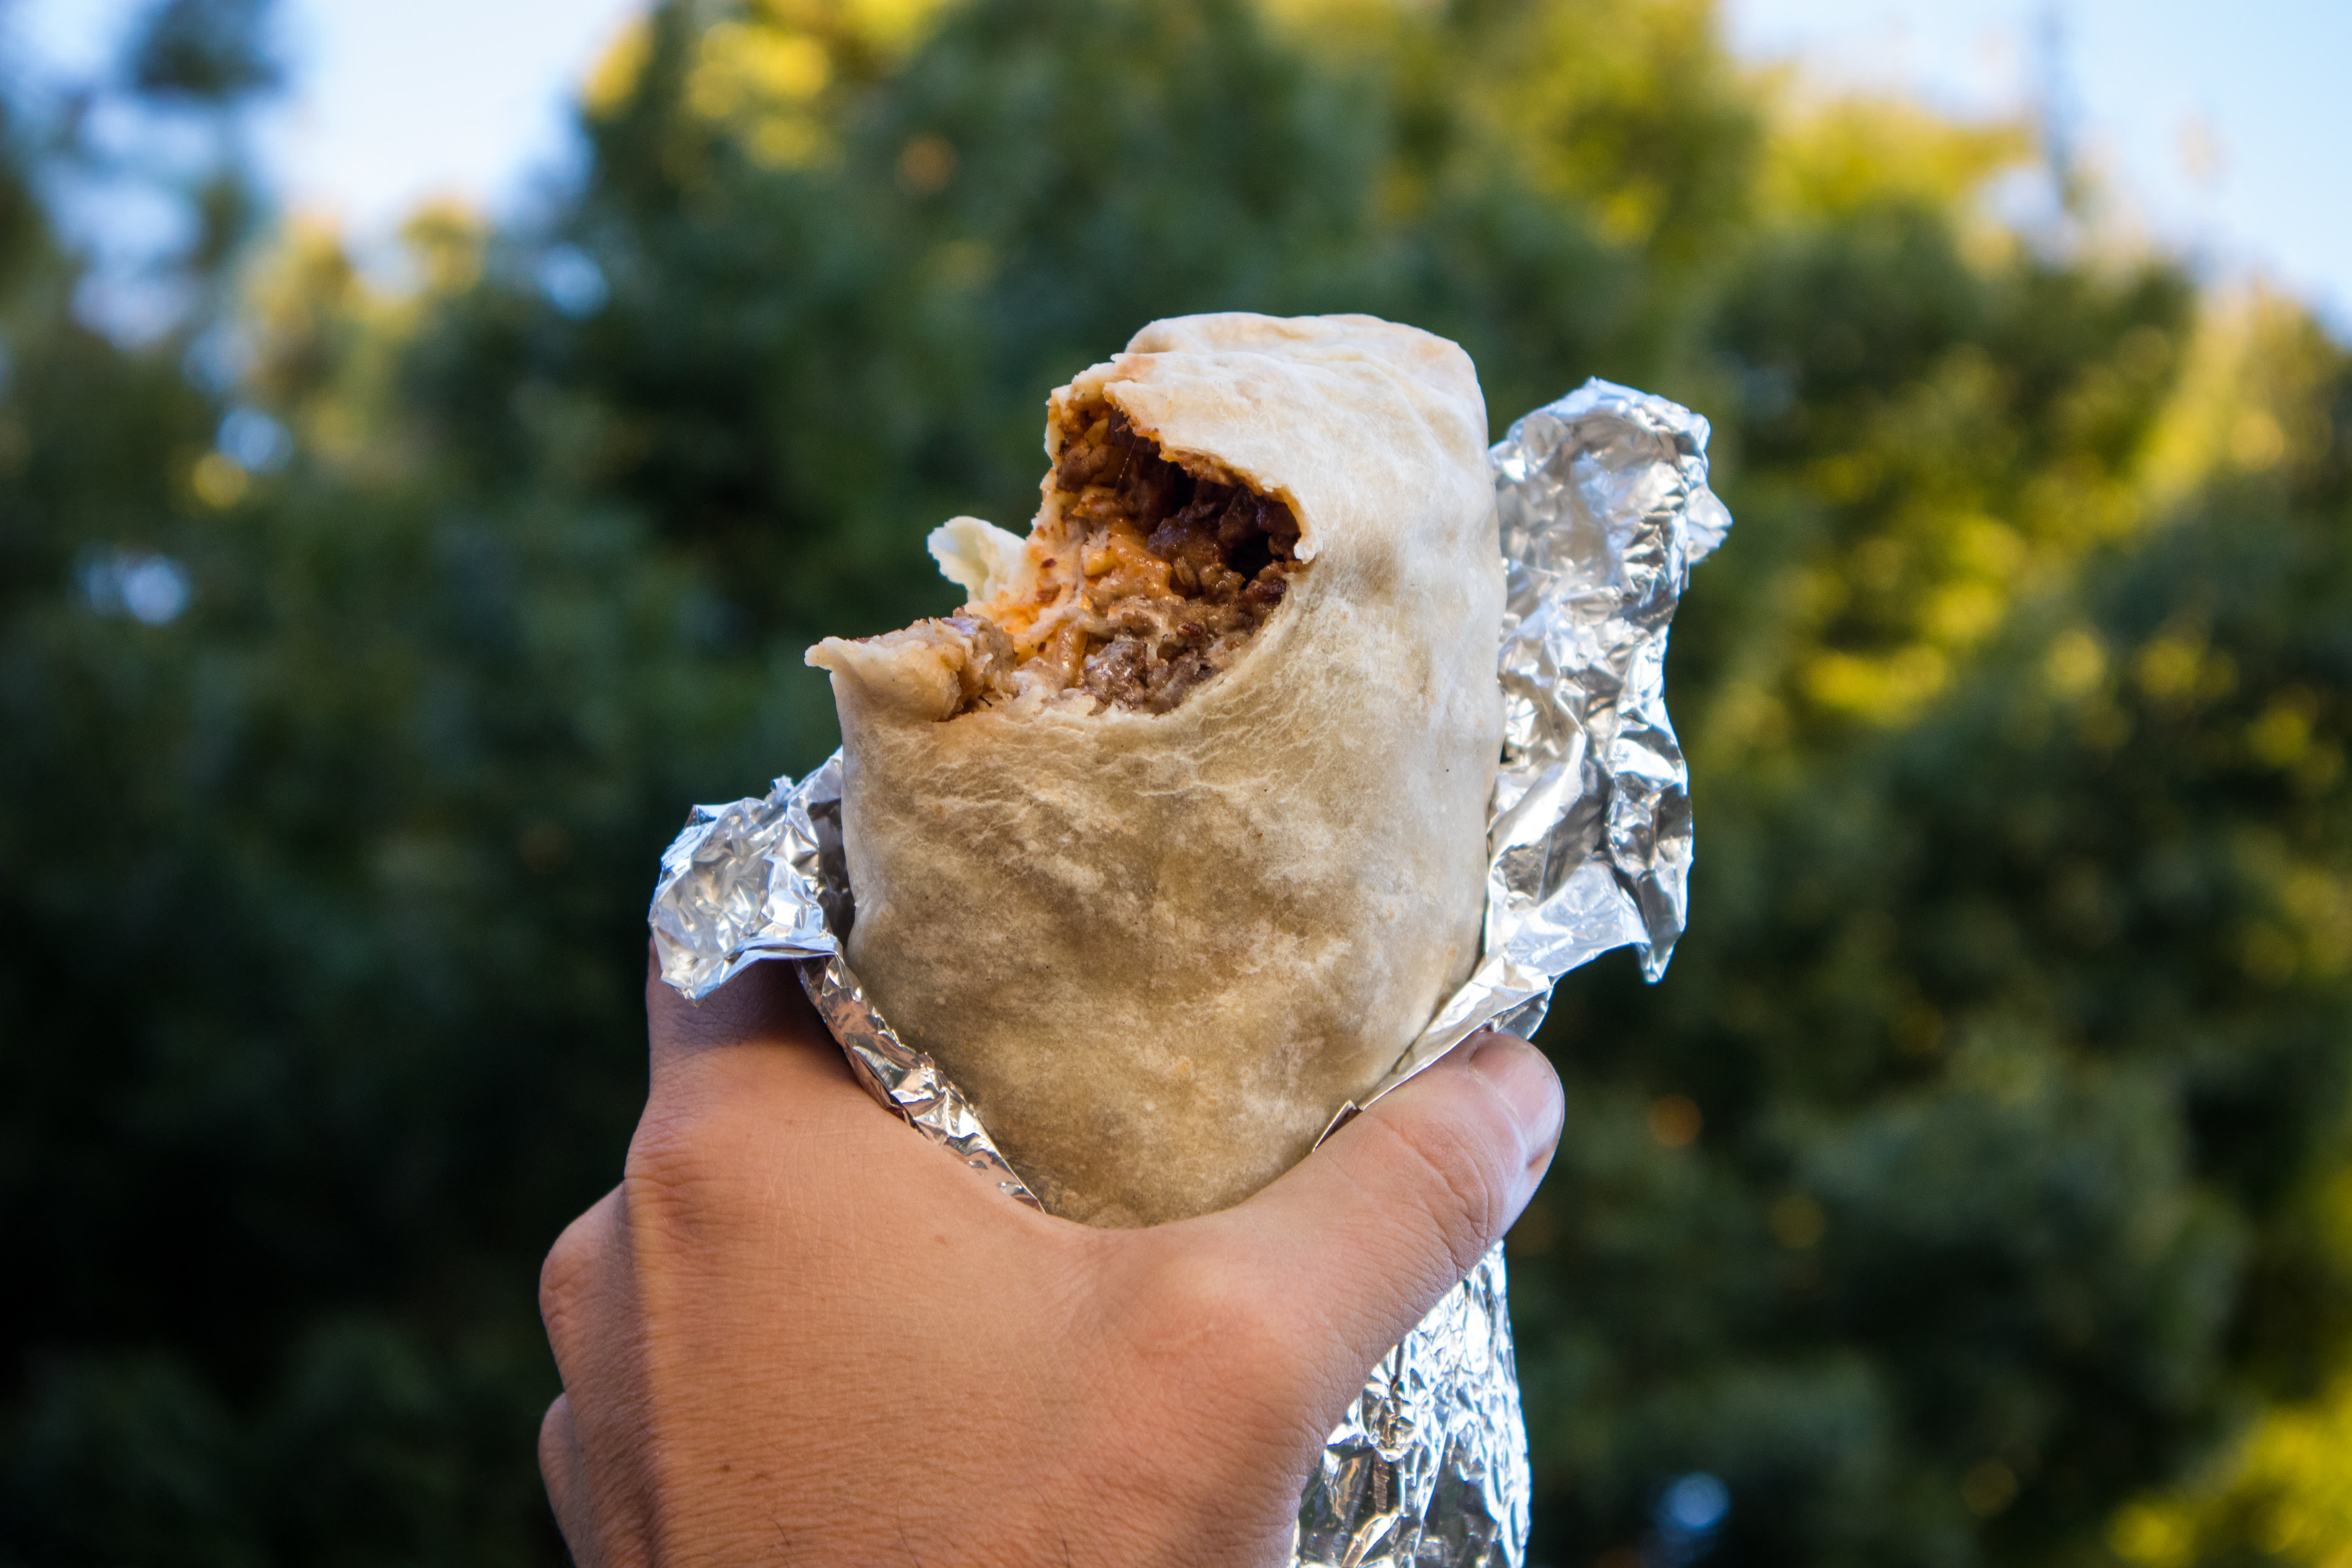 Why Your Burrito Probably at Restaurant Tastes Better | Kitchn The a